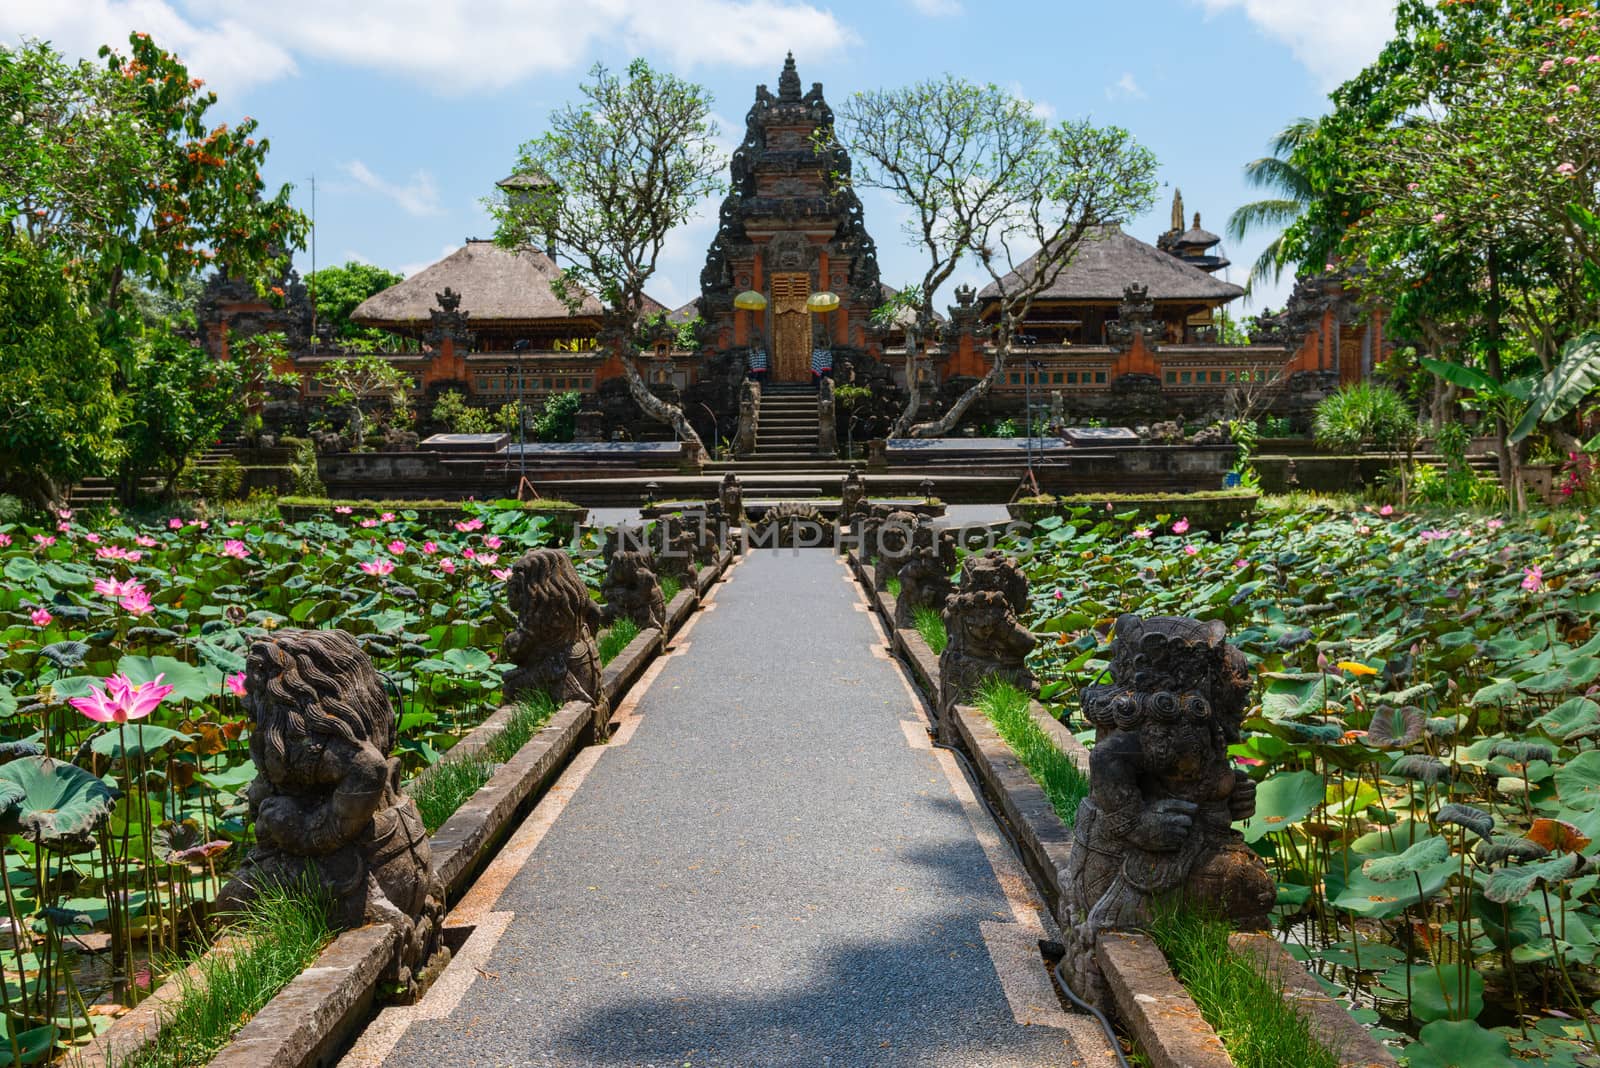 Balinese temple Pura Saraswati in Ubud with lotus flowers in ponds in front